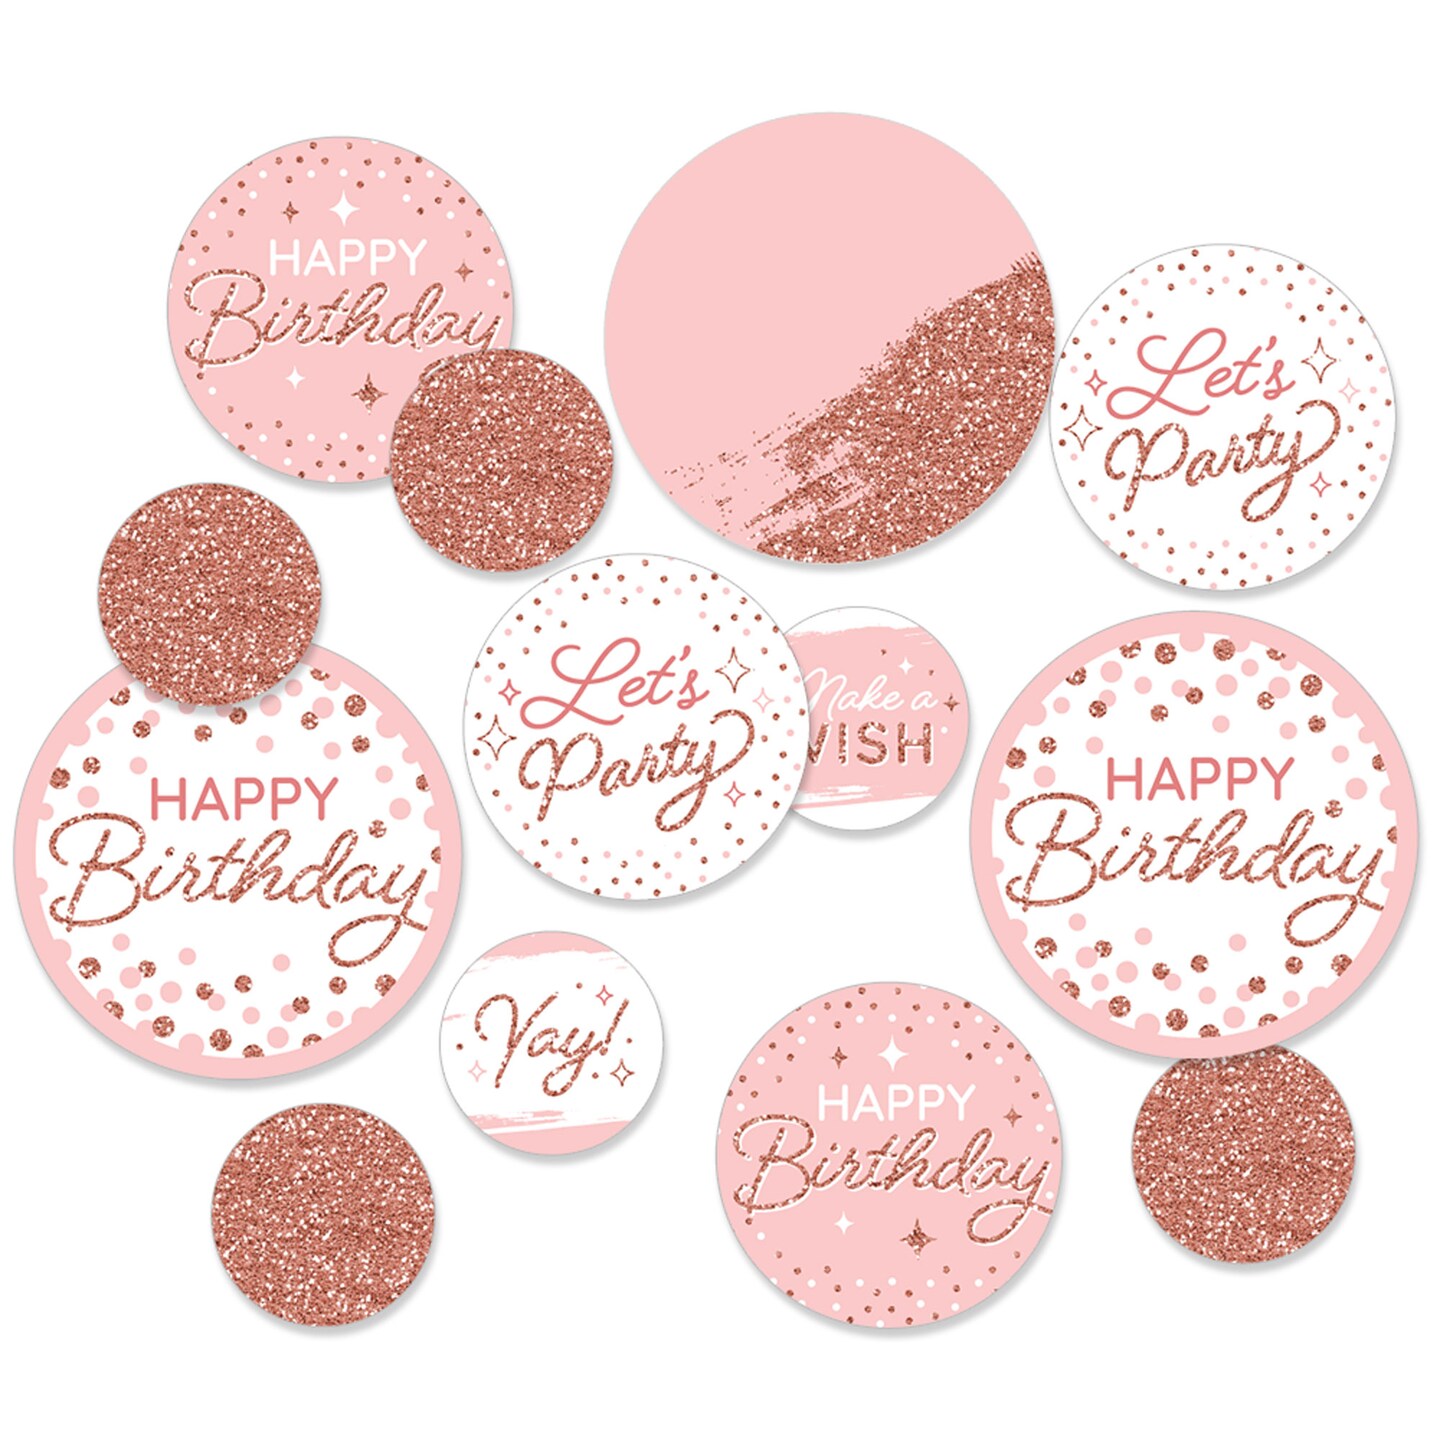 Big Dot of Happiness Pink Rose Gold Birthday - Happy Birthday Party Giant Circle Confetti - Party Decorations - Large Confetti 27 Count